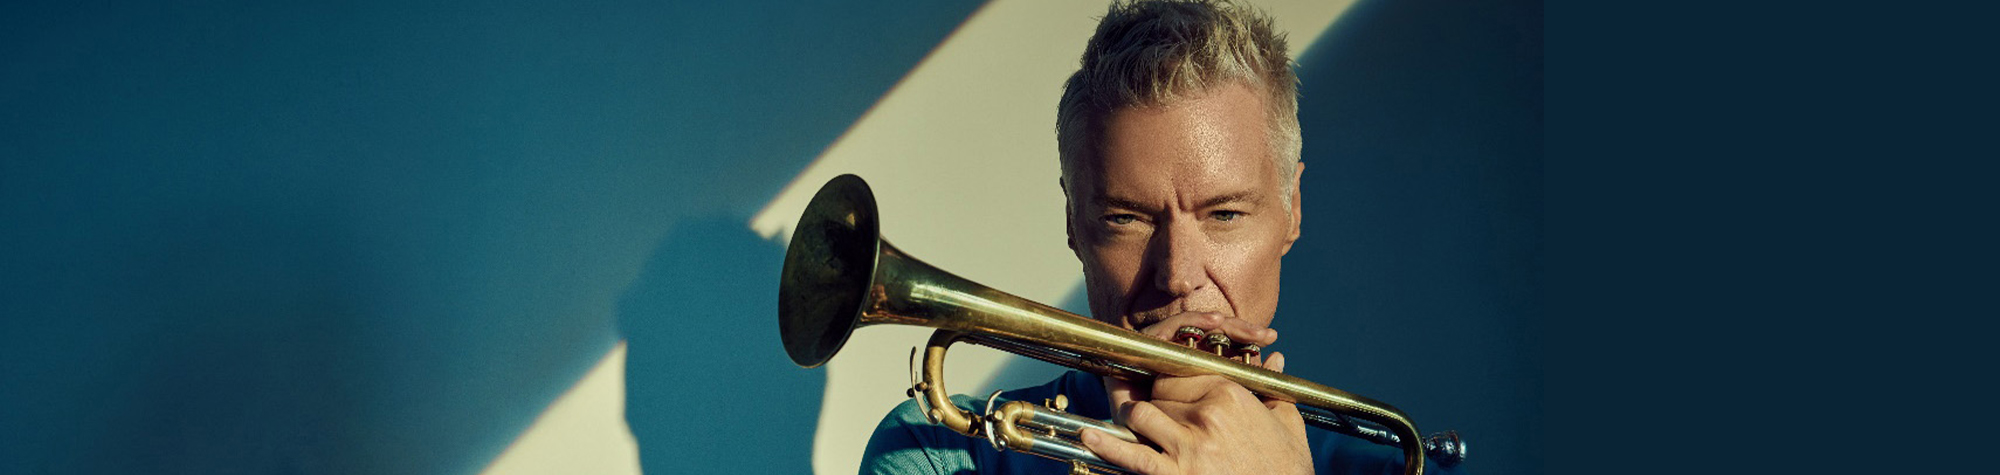 Chris Botti Revisited- The Other Side of the Bell #113